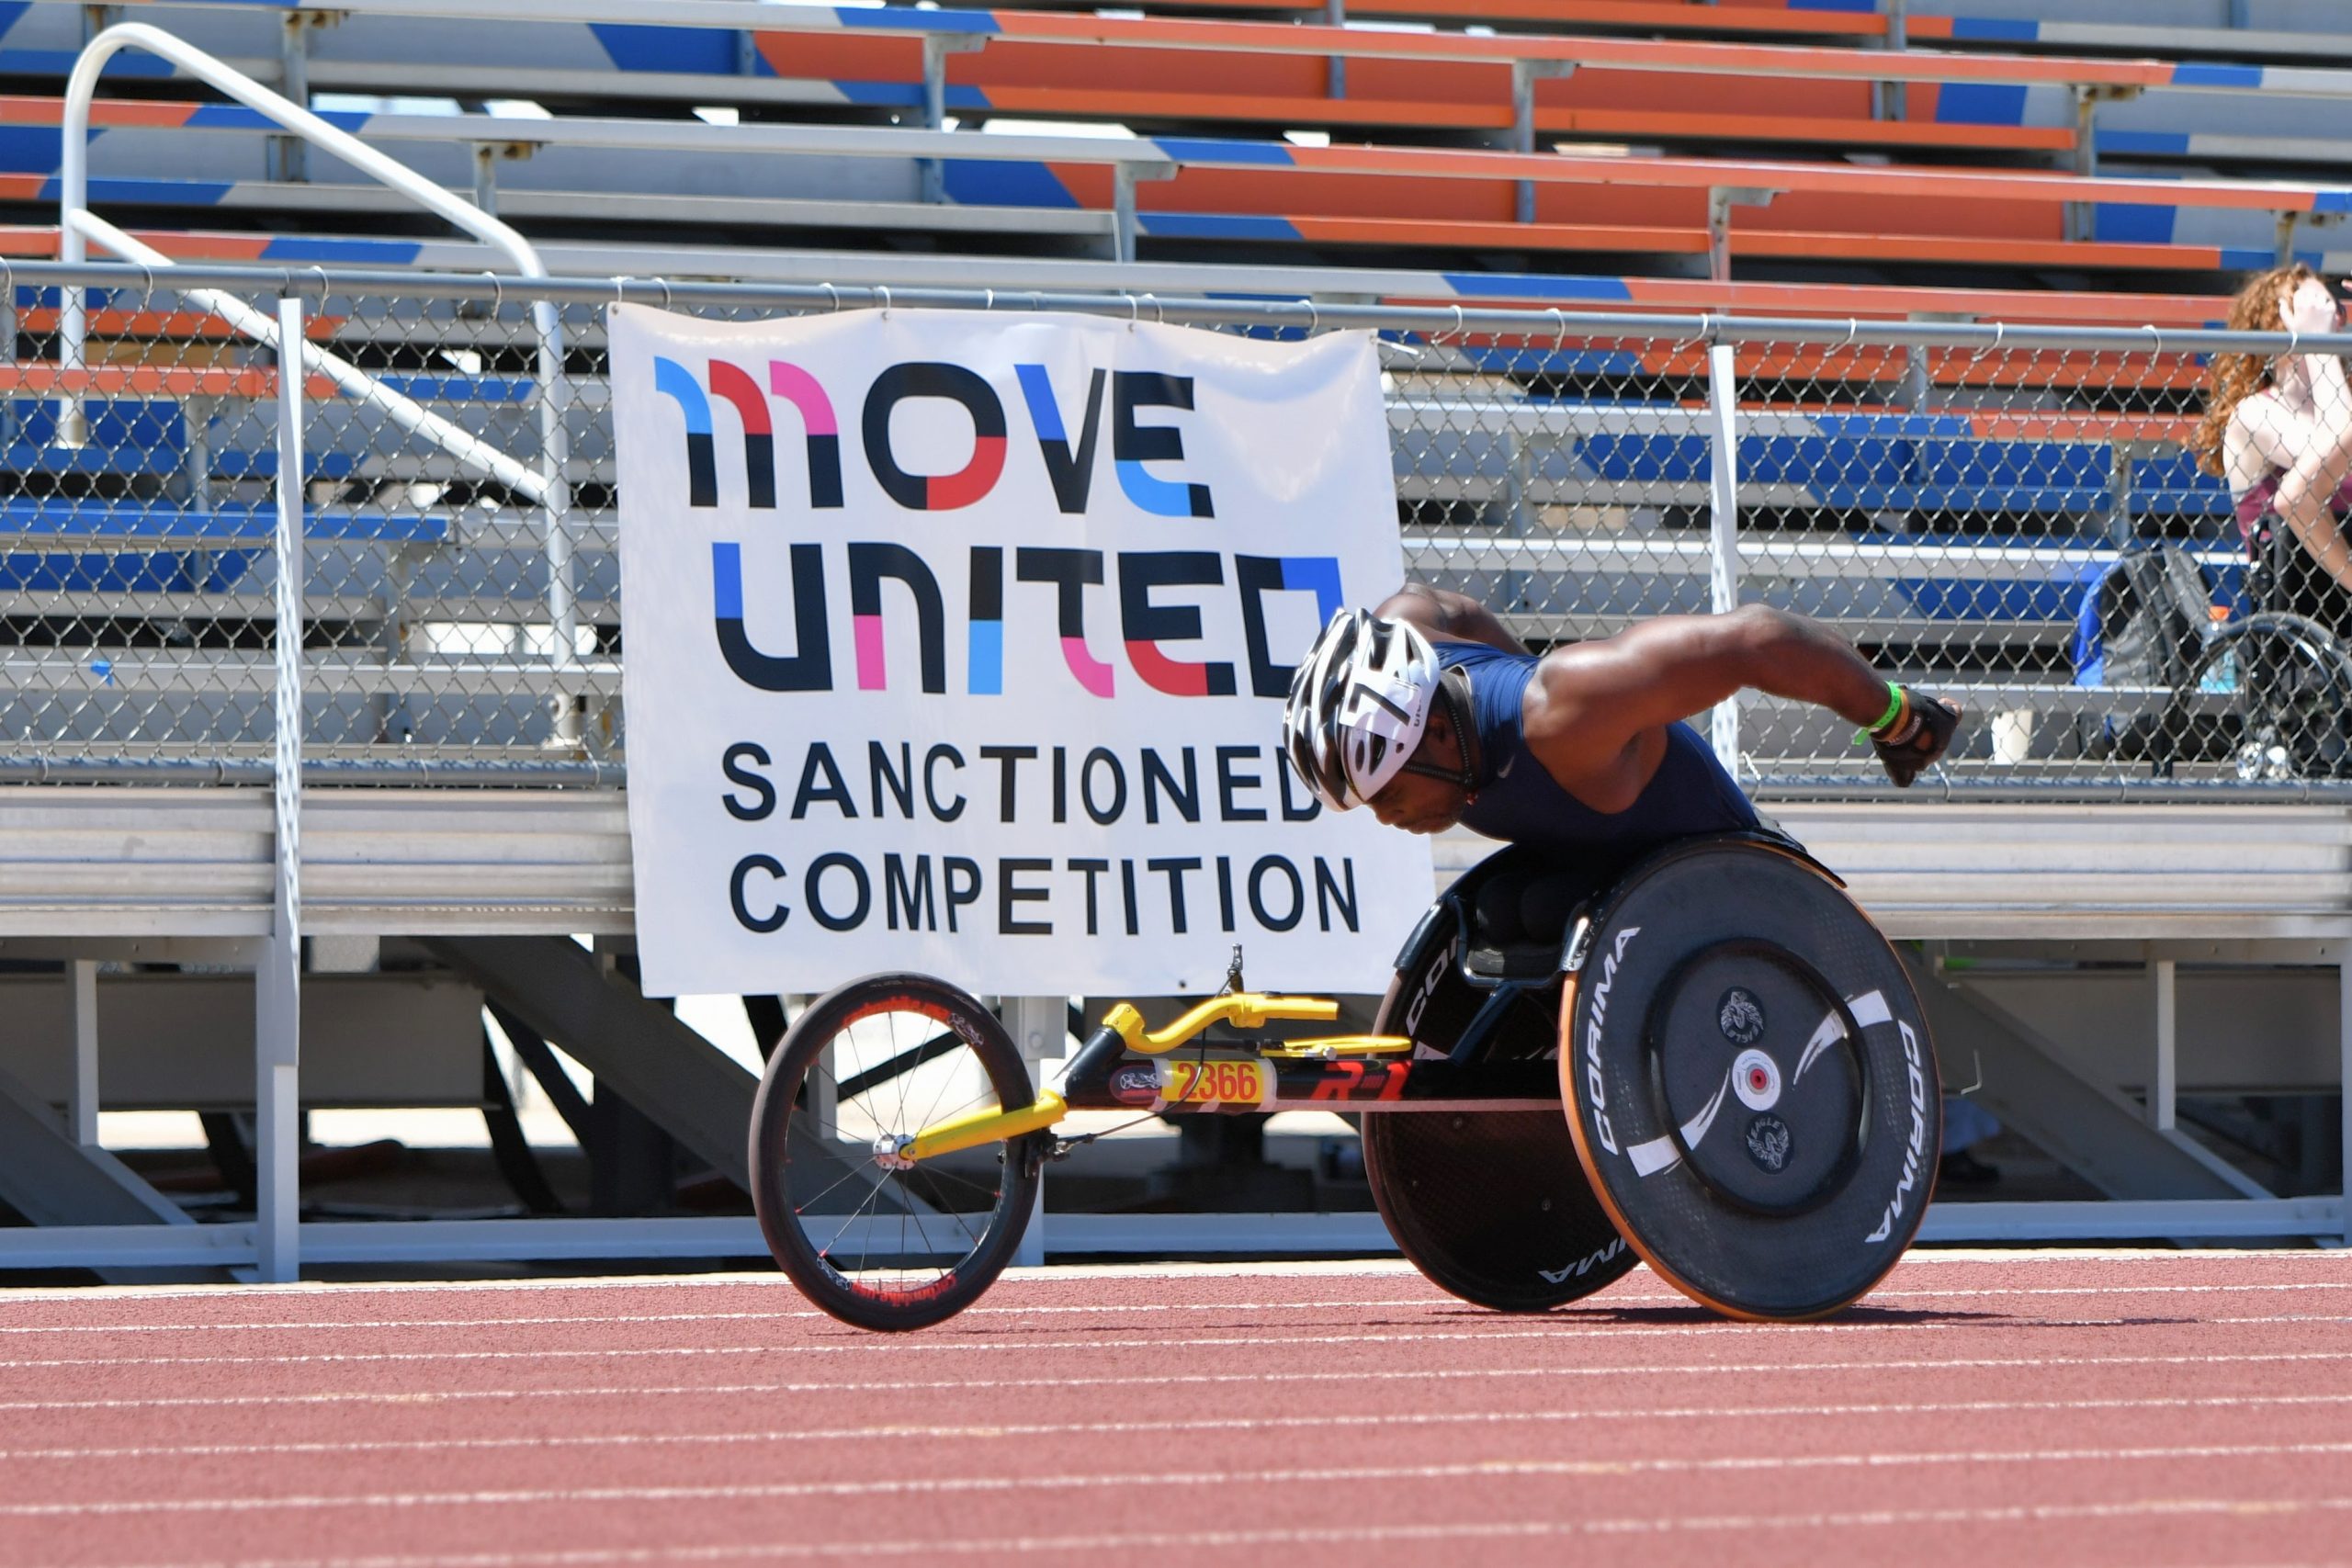 Sanctioned Competitions Calendar & Brochure - Move United